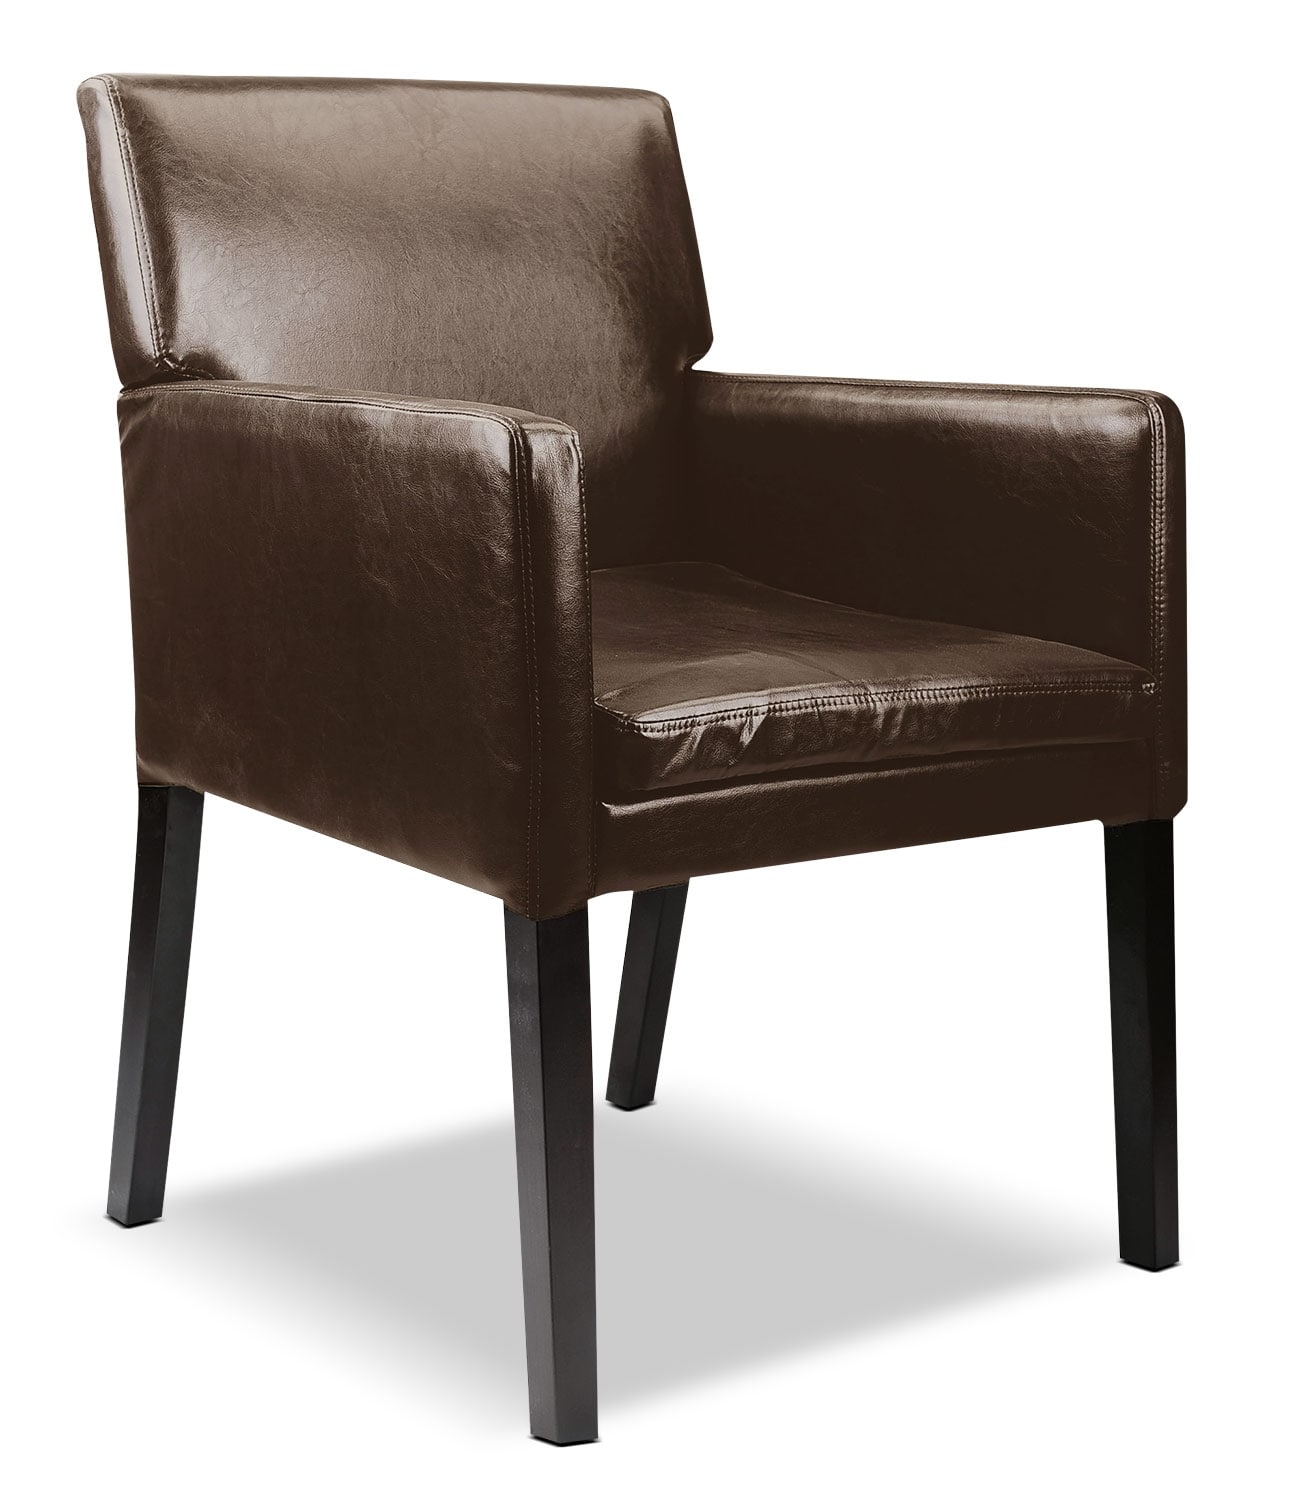 LAD Bonded Leather Accent Chair Dark Brown The Brick